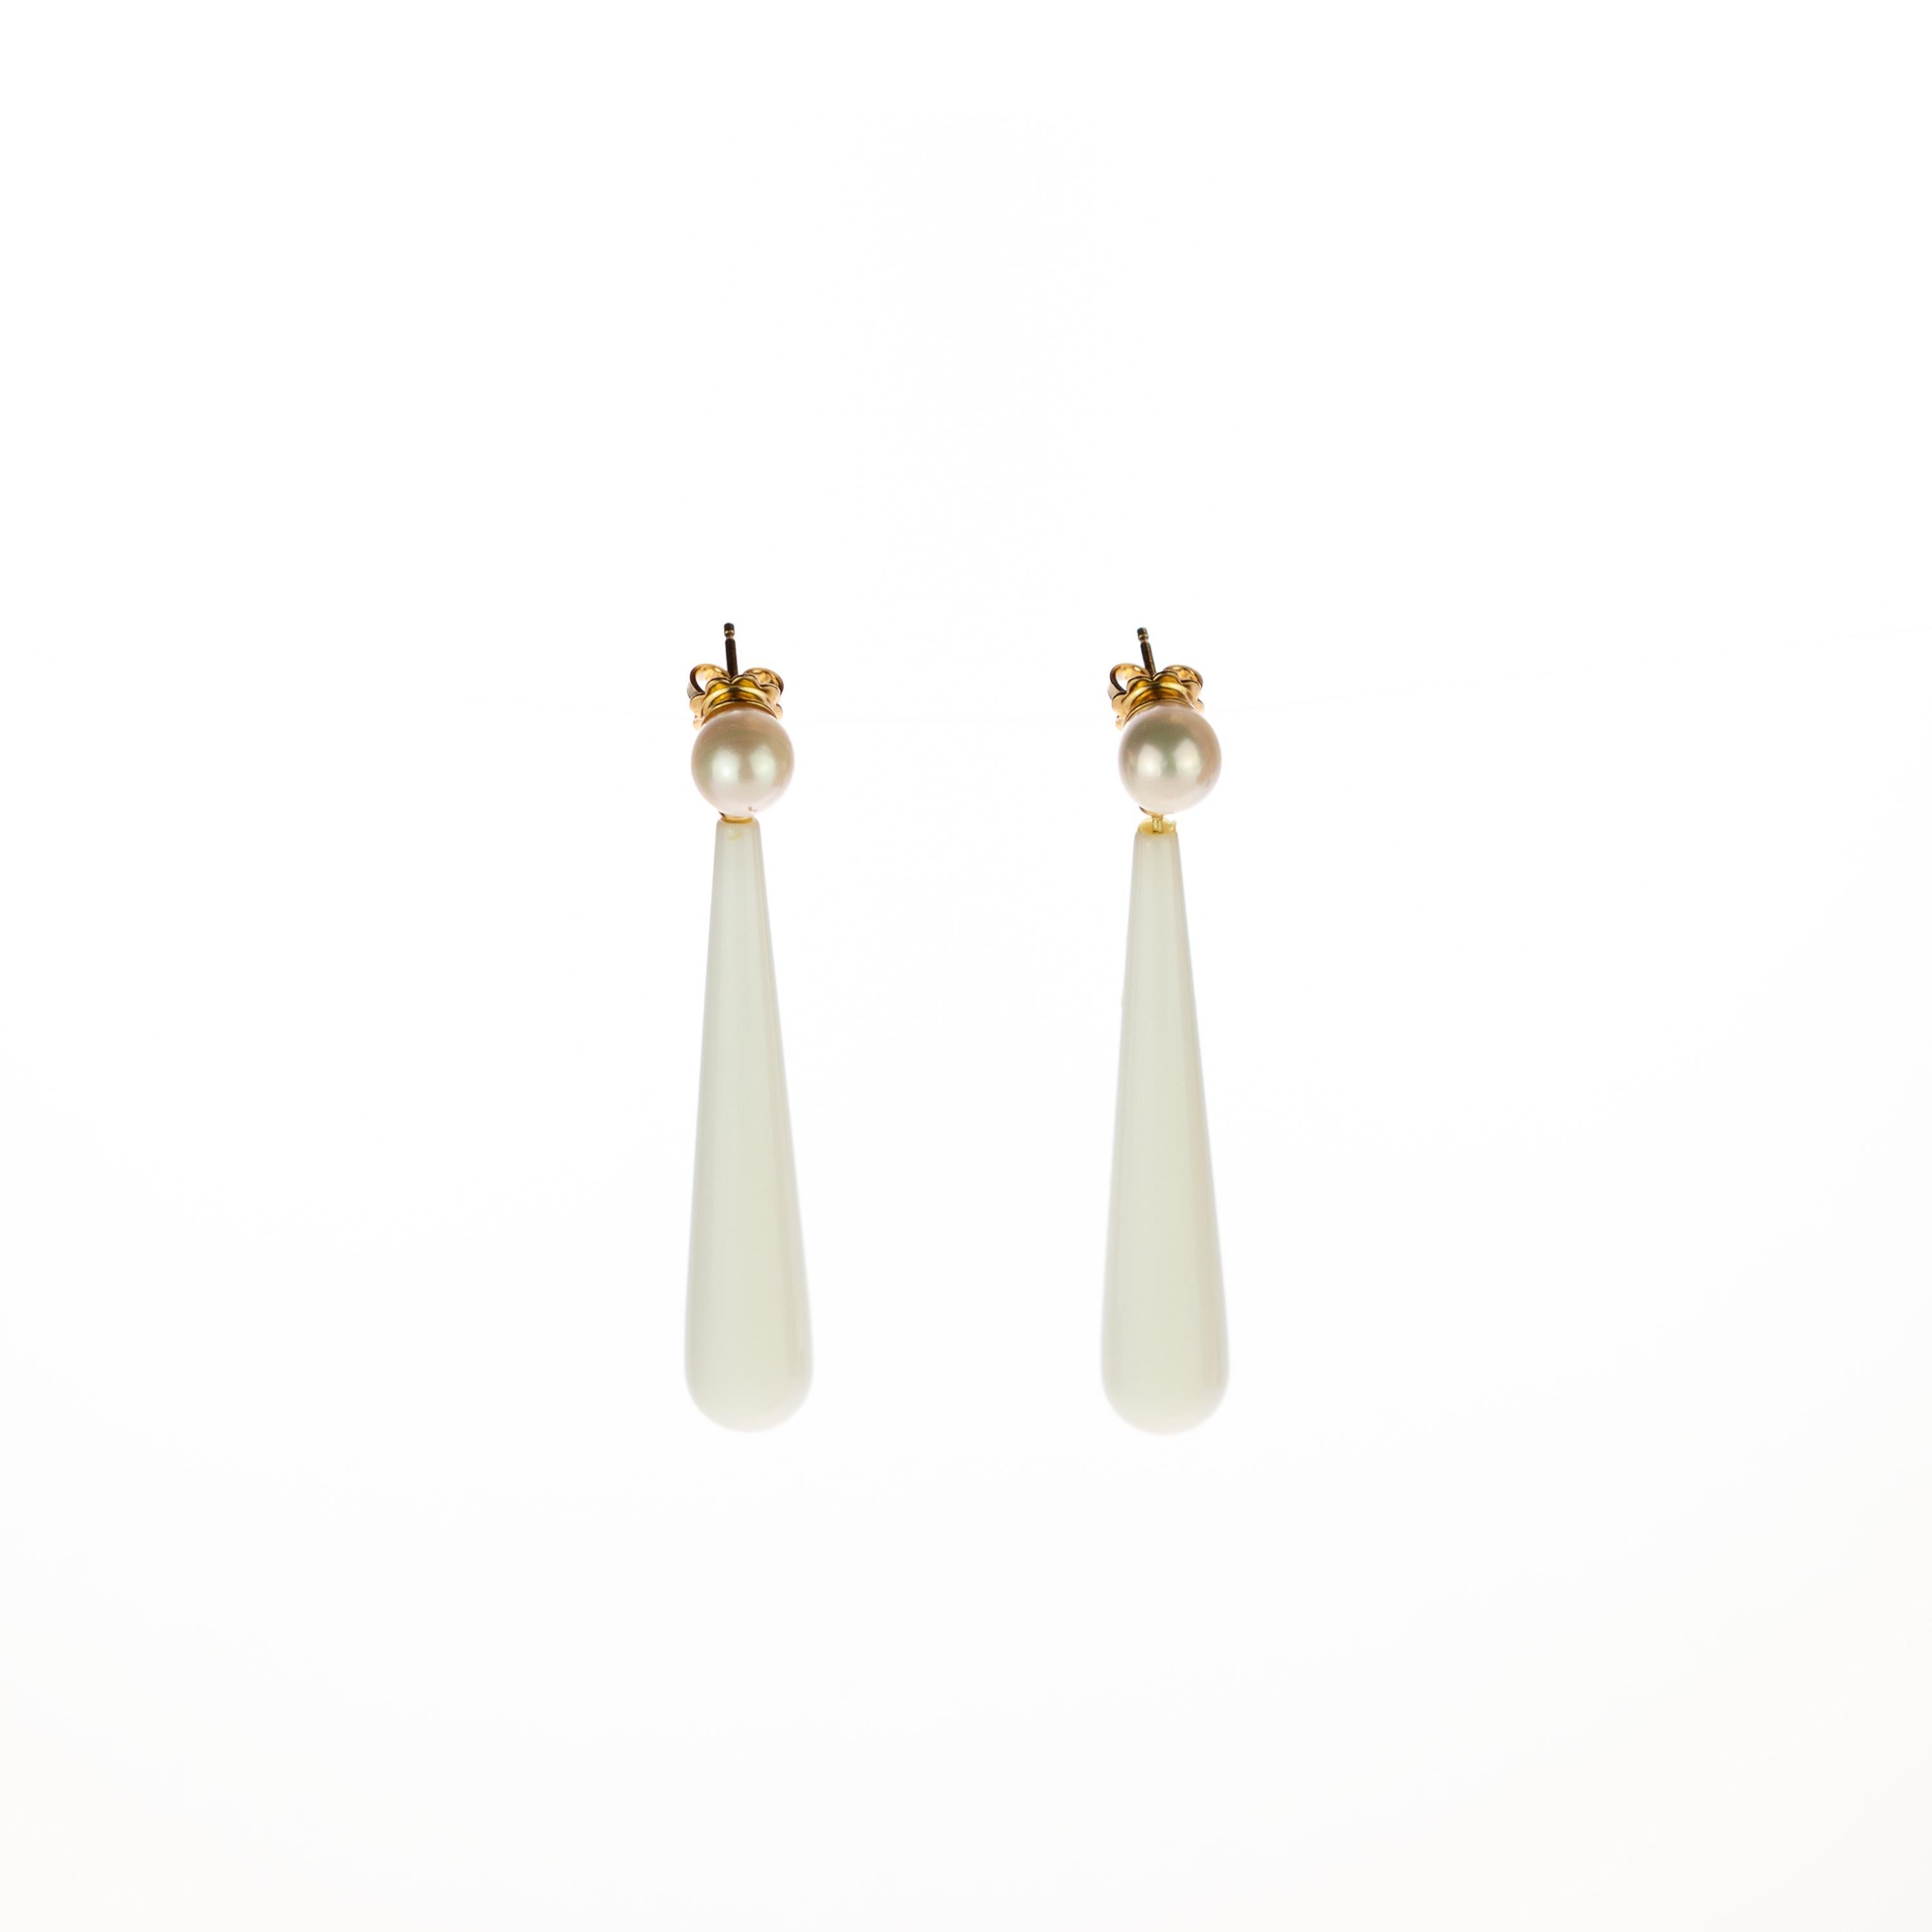 Clear and fashionable white bold long agate crafted earrings. Holded by a 18 karat yellow gold that recreates a stylish piece of jewelry embellished with natural pearls. The perfect touch full of modernity with a tear drop design.
 
These earrings